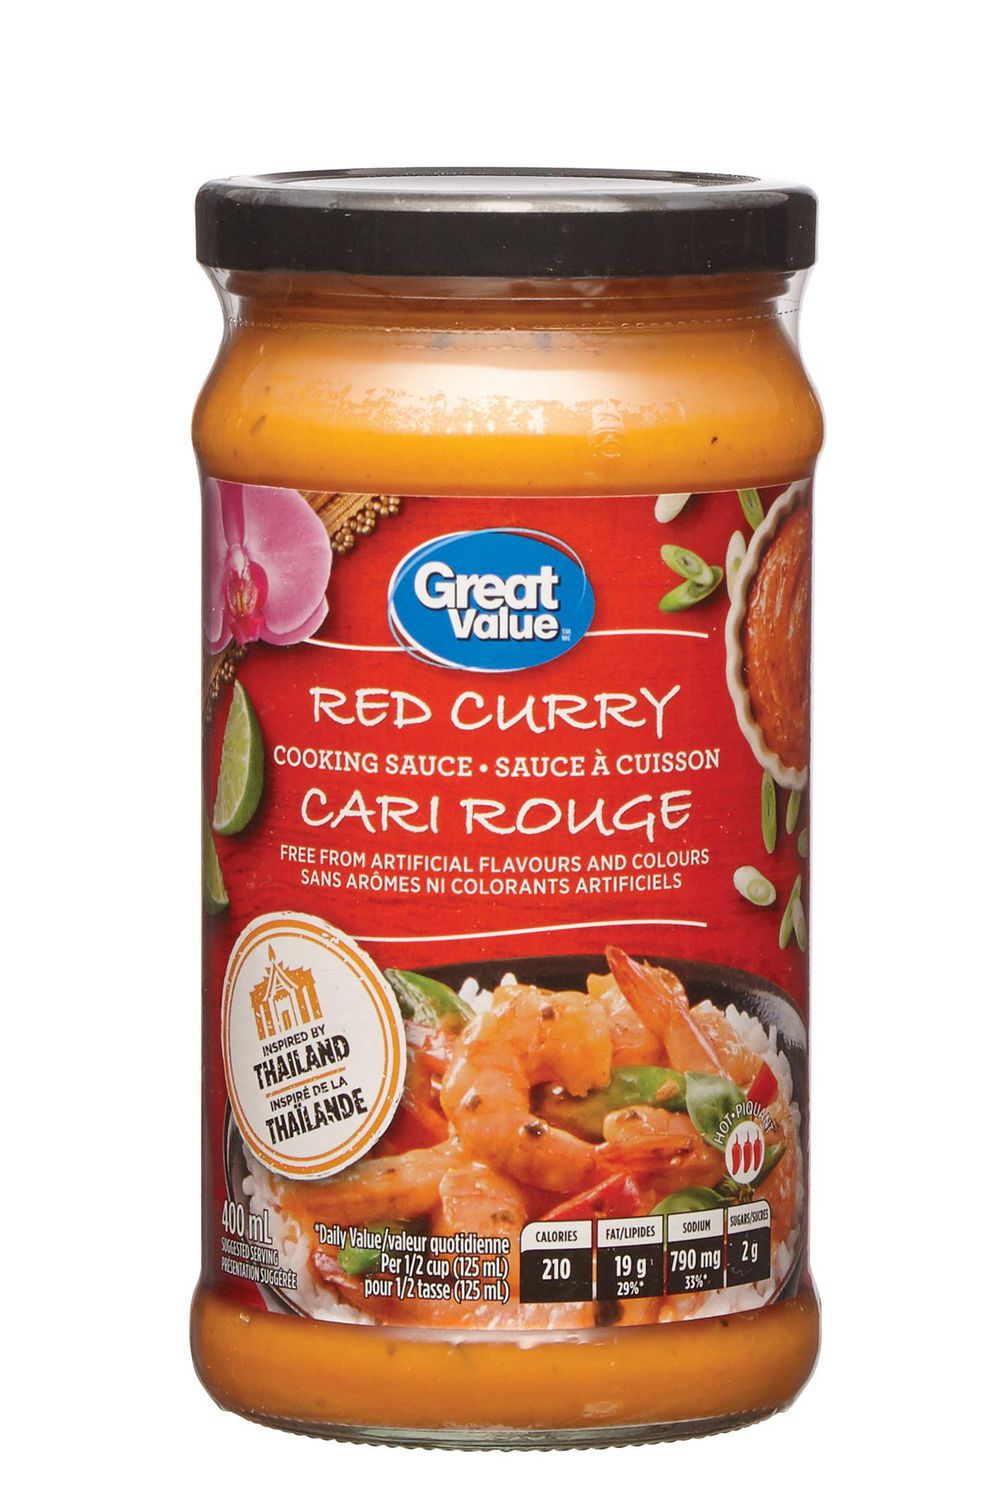 Great Value Red Curry Cooking Sauce | Walmart Canada